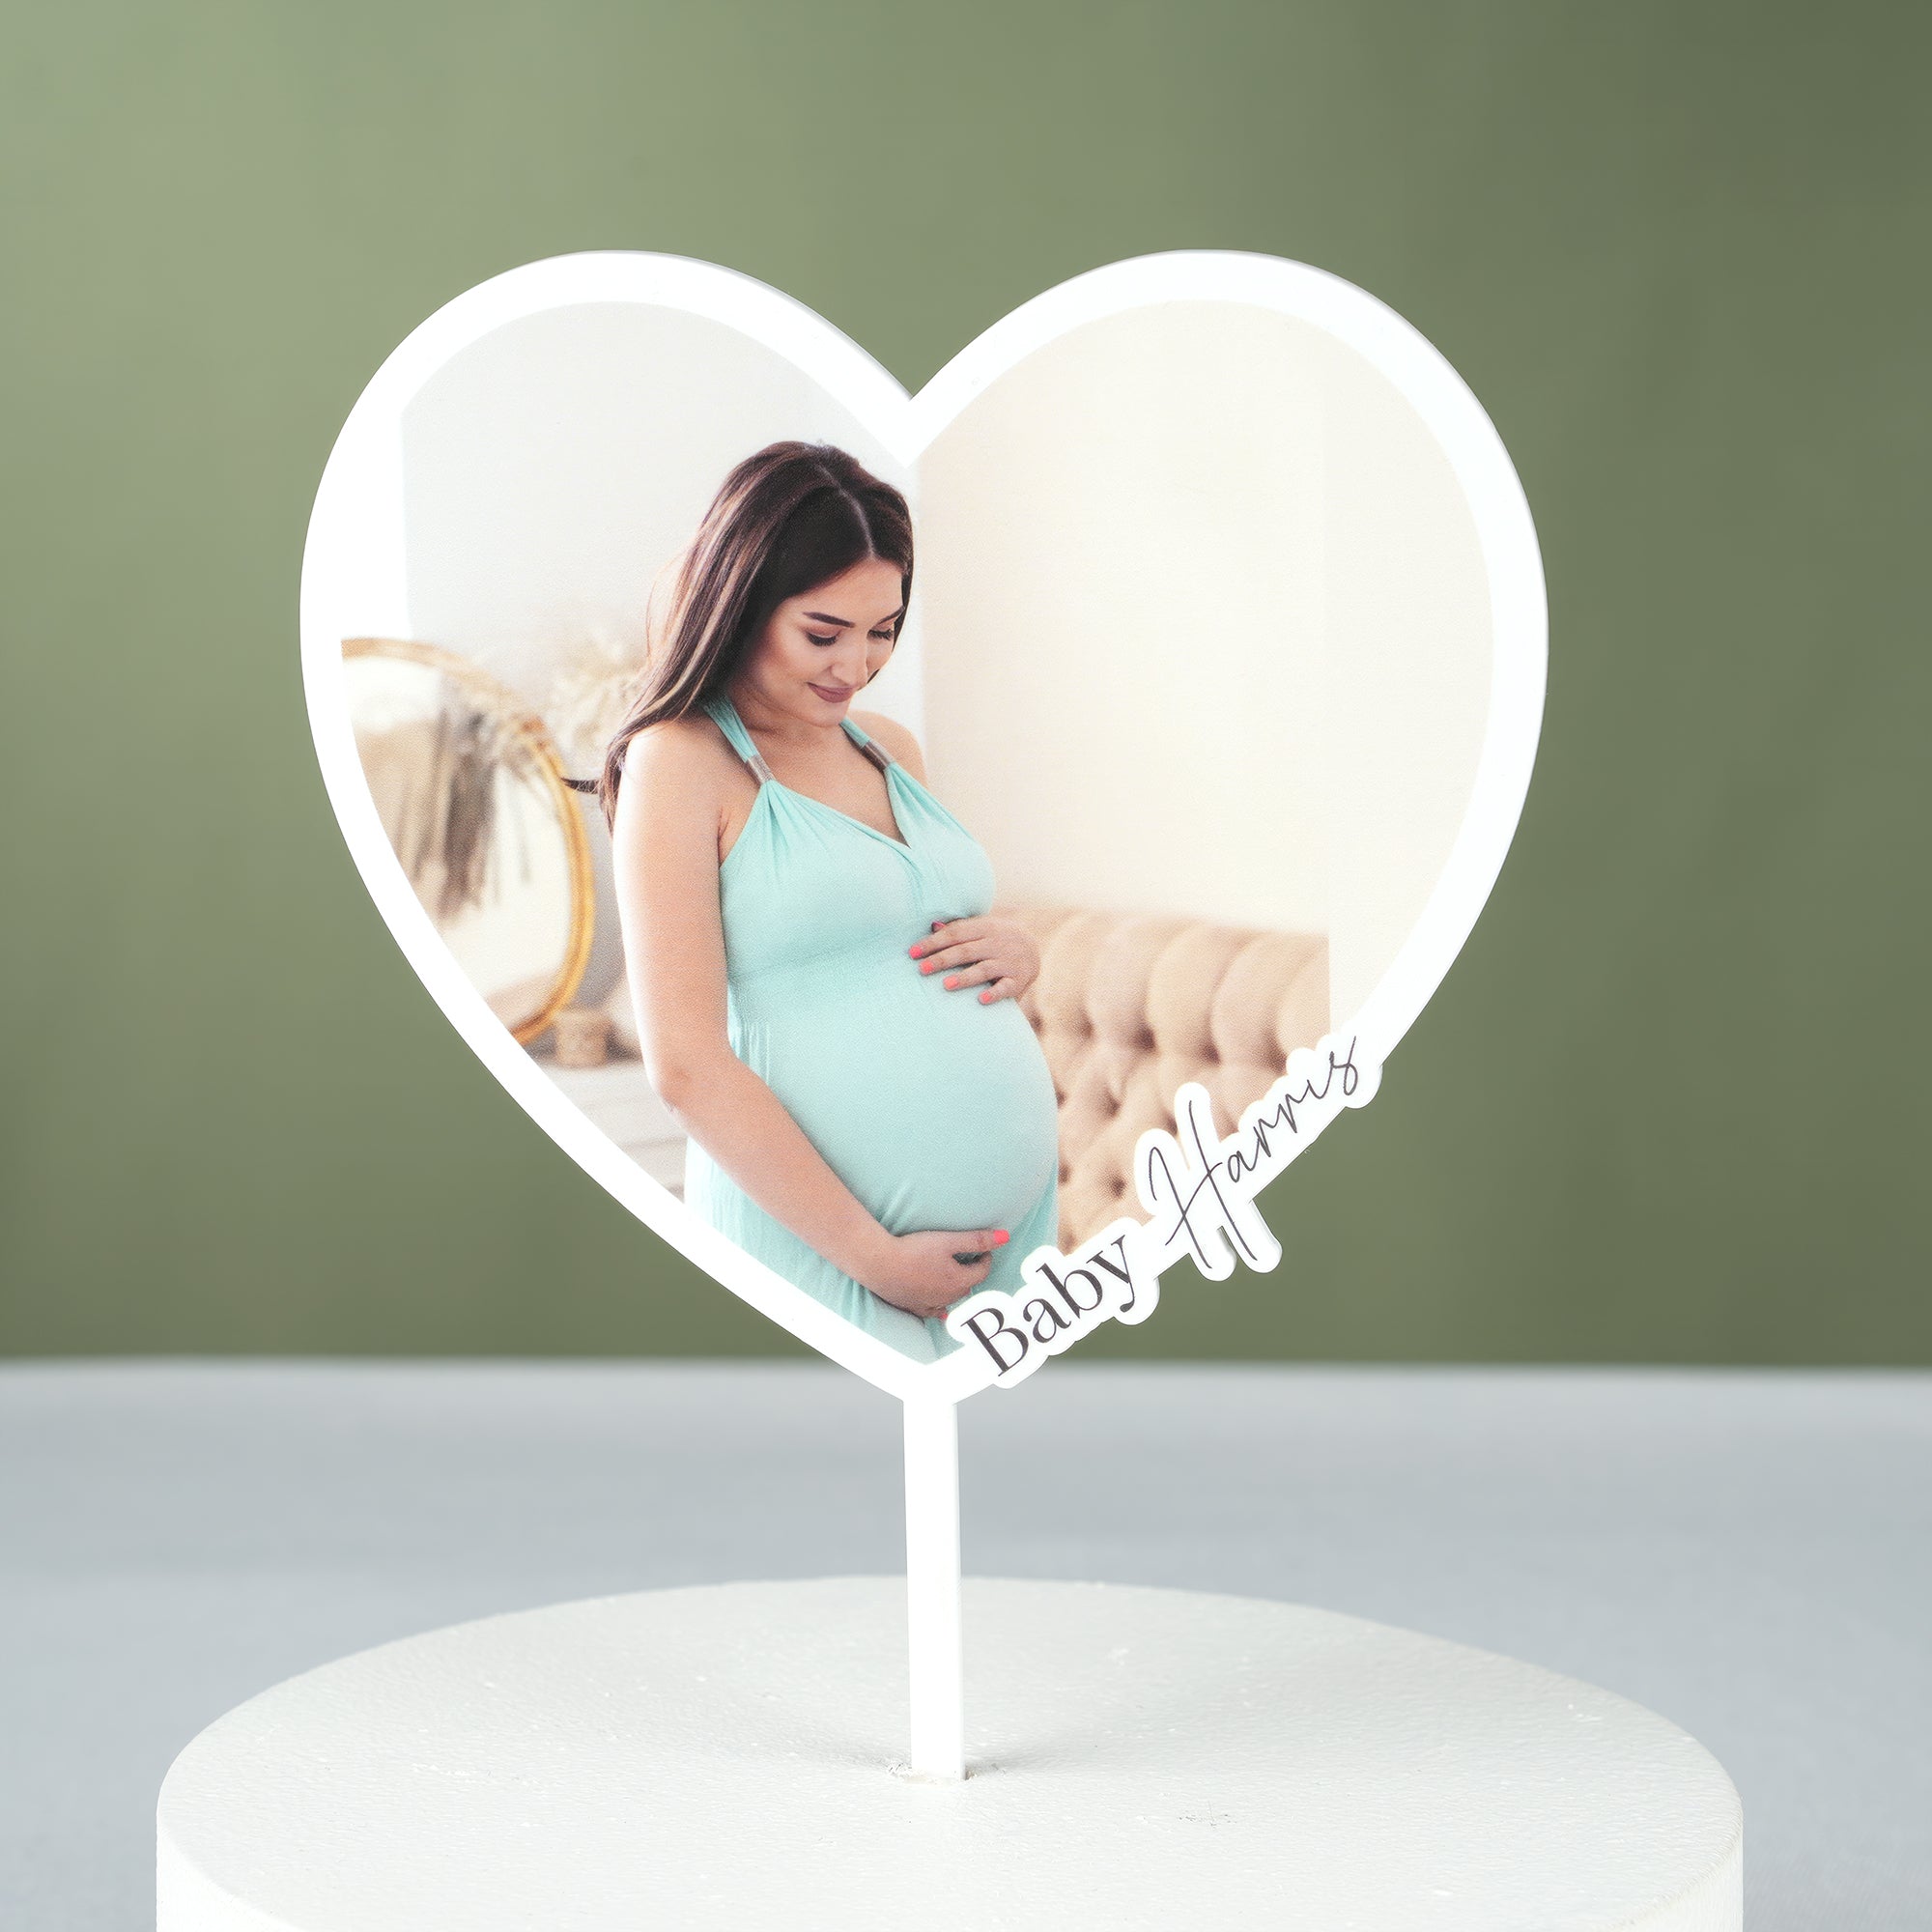 Personalised Heart Shaped Photo Printed Baby Shower Cake Topper Decoration - Cake Topper